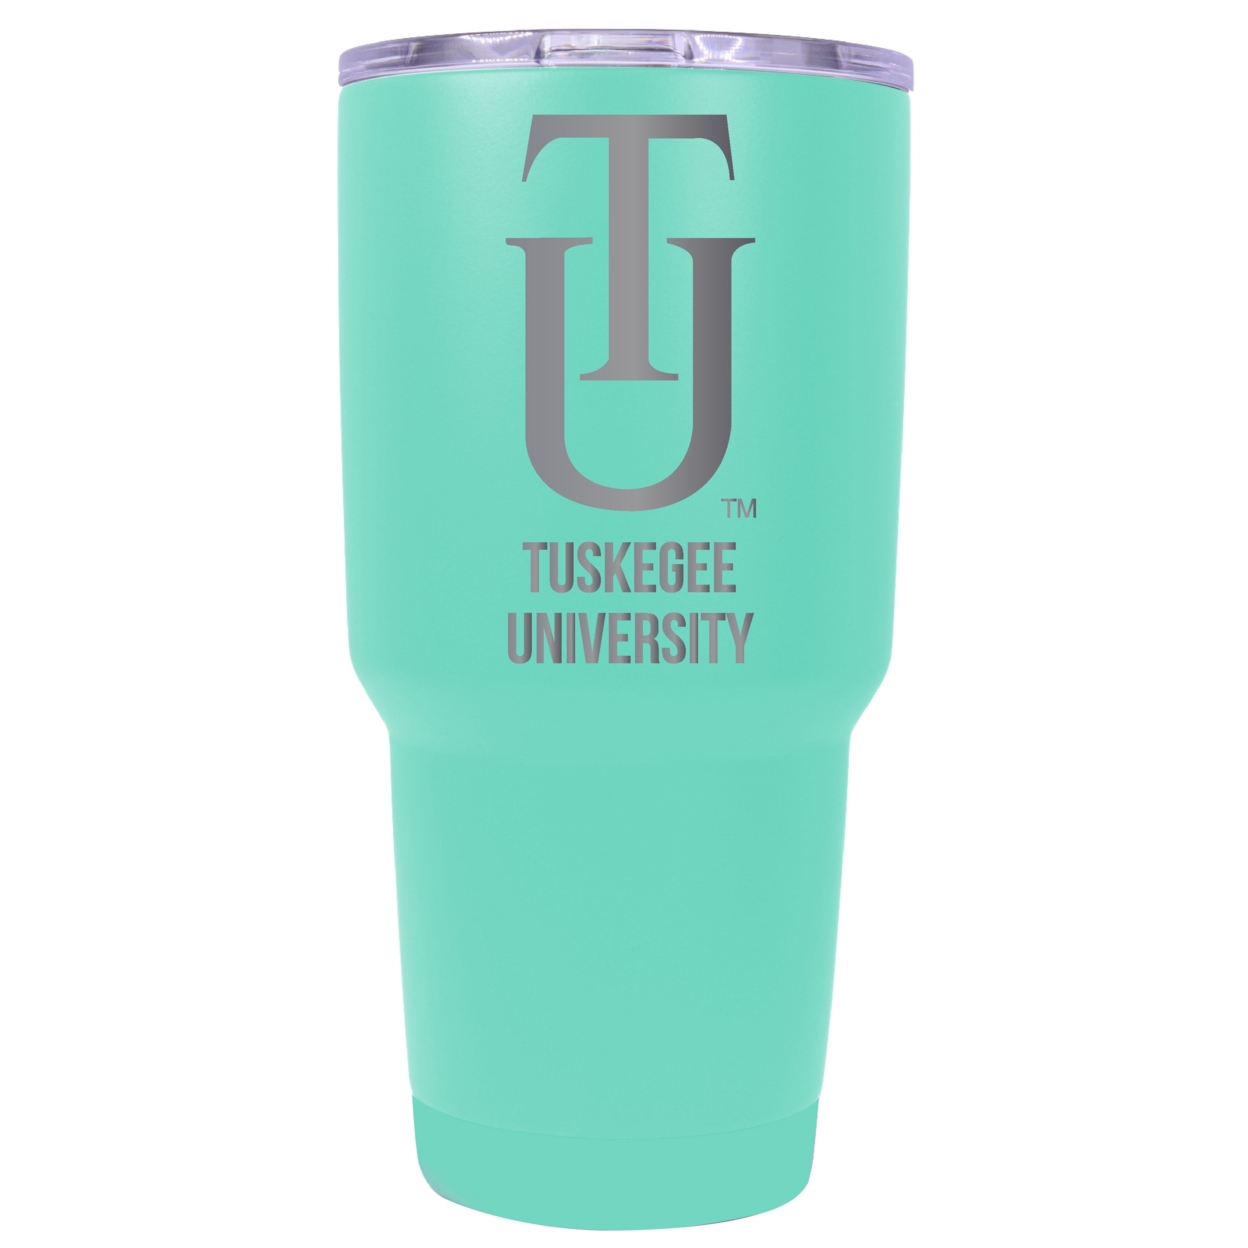 Tuskegee University 24 Oz Laser Engraved Stainless Steel Insulated Tumbler - Choose Your Color. - Seafoam